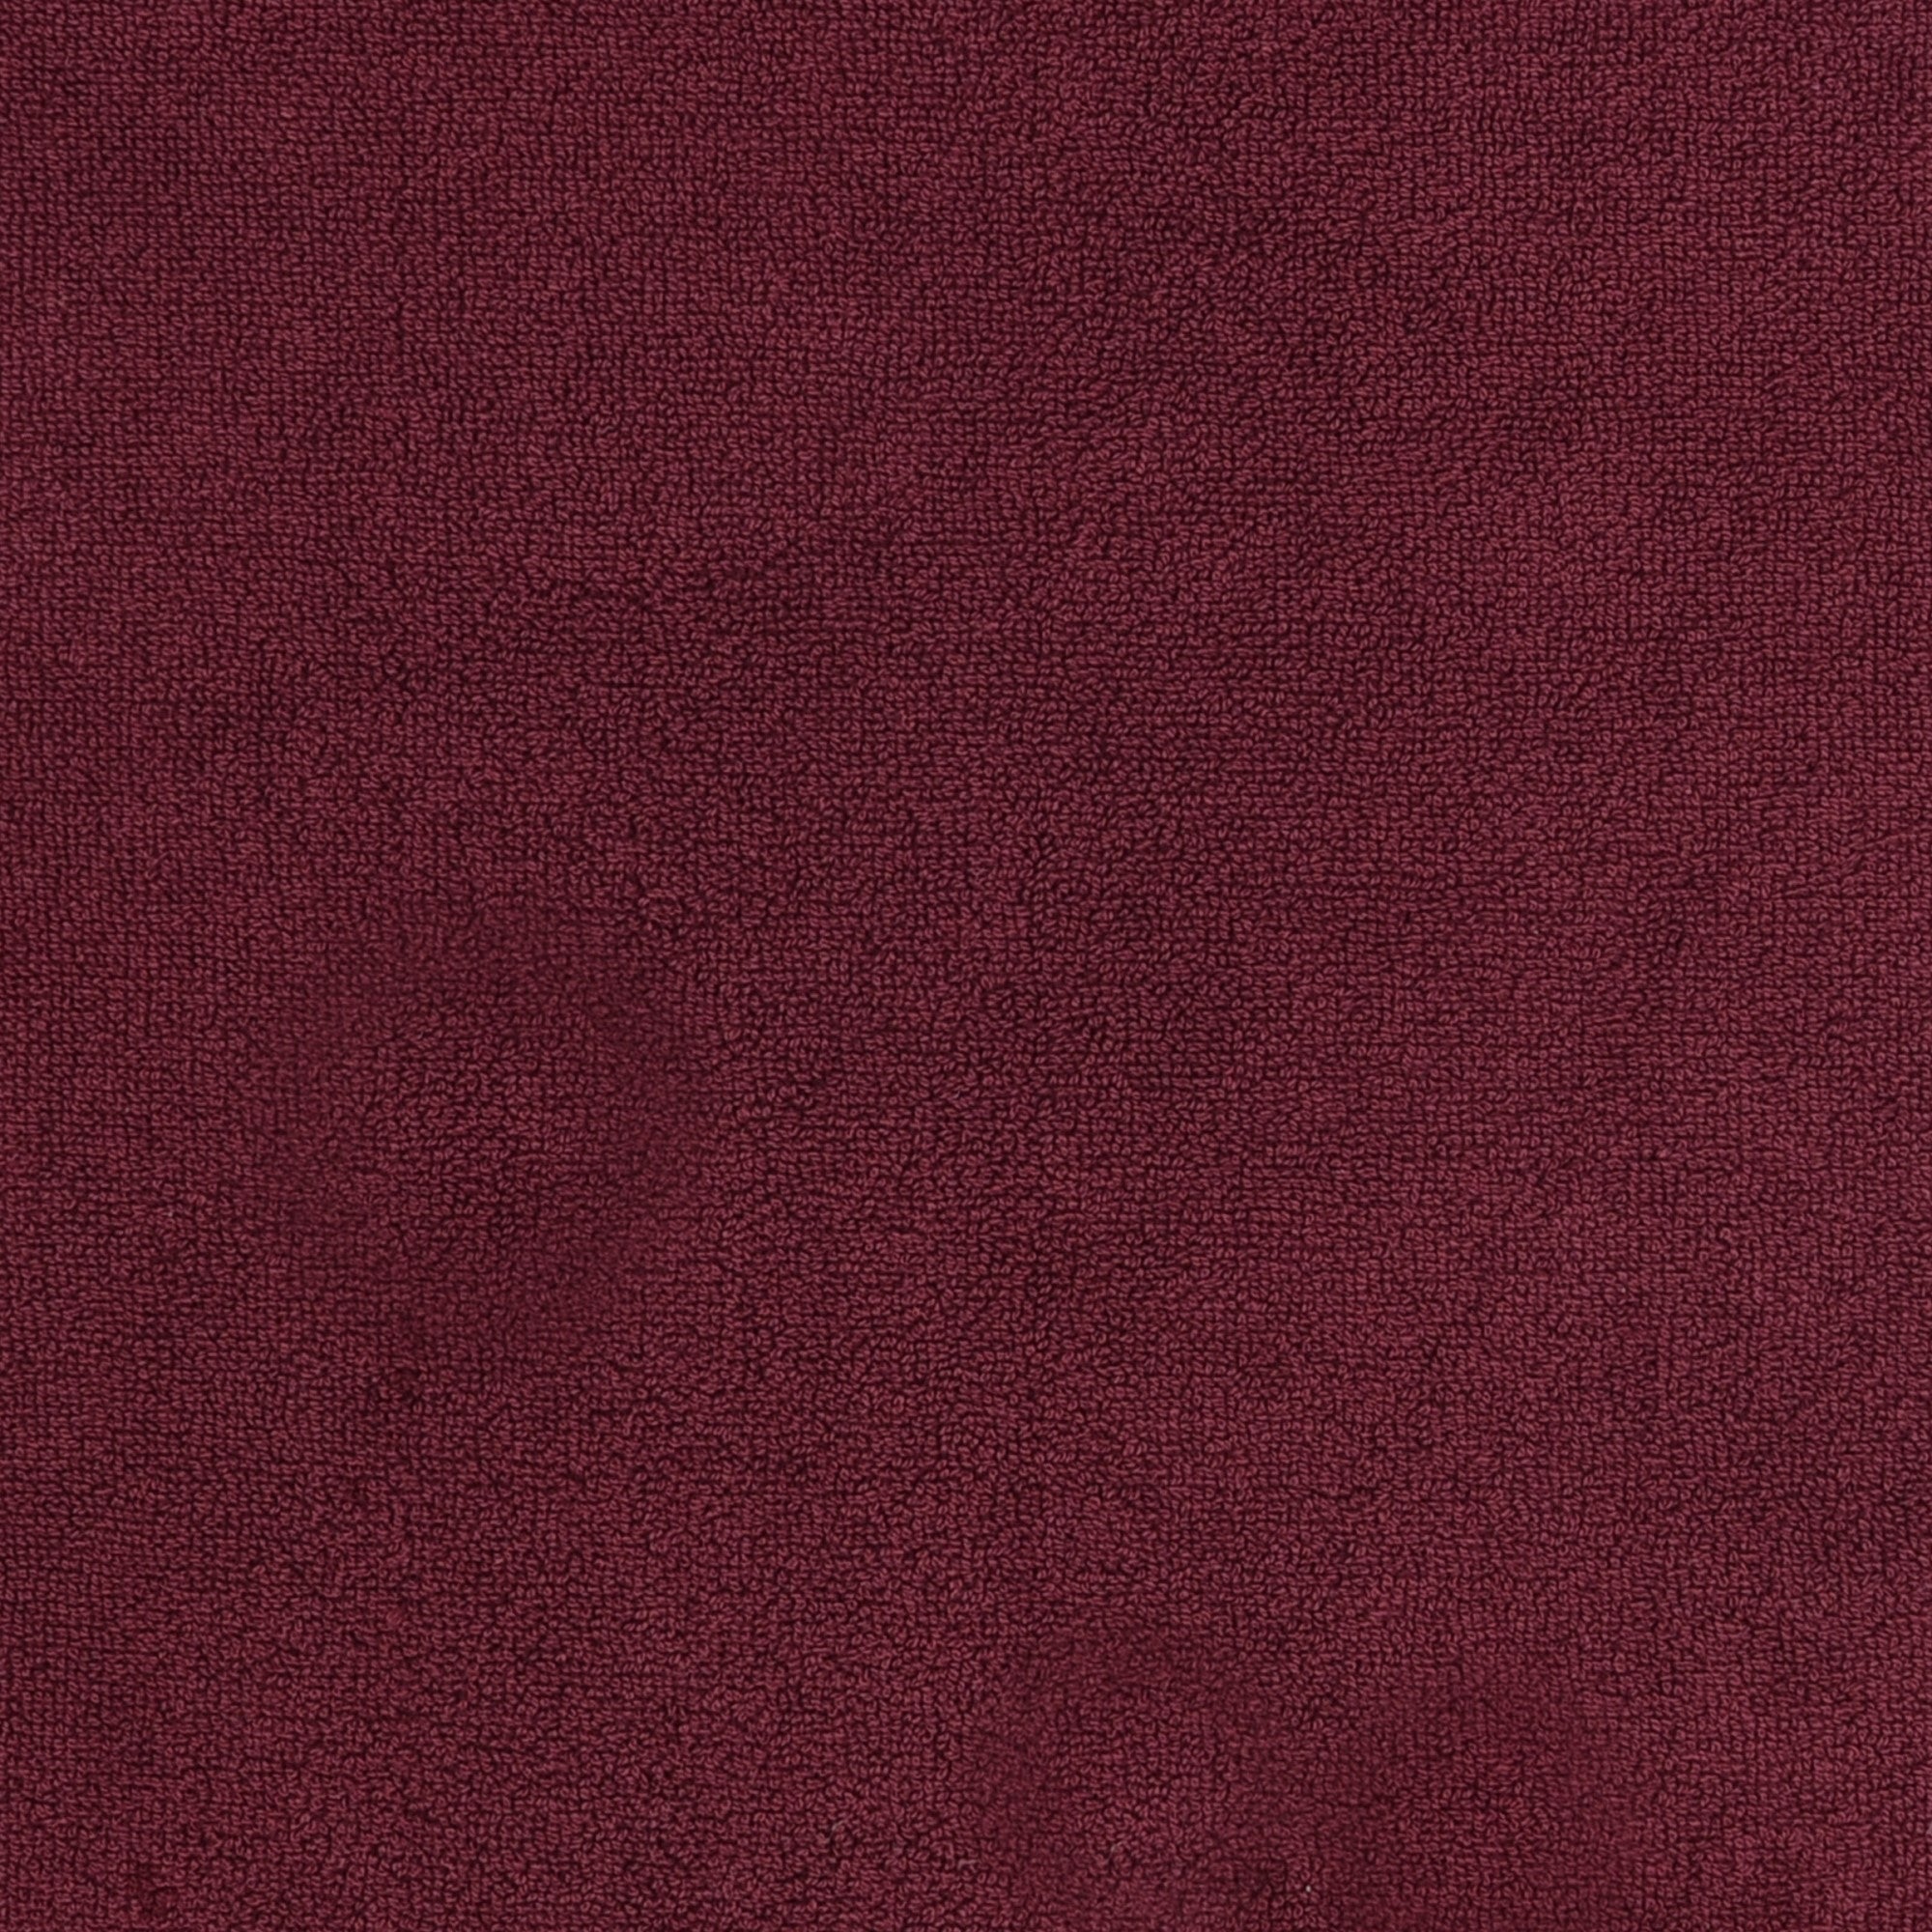 Face Cloth (3 pack) Abode Eco by Drift Home in Claret